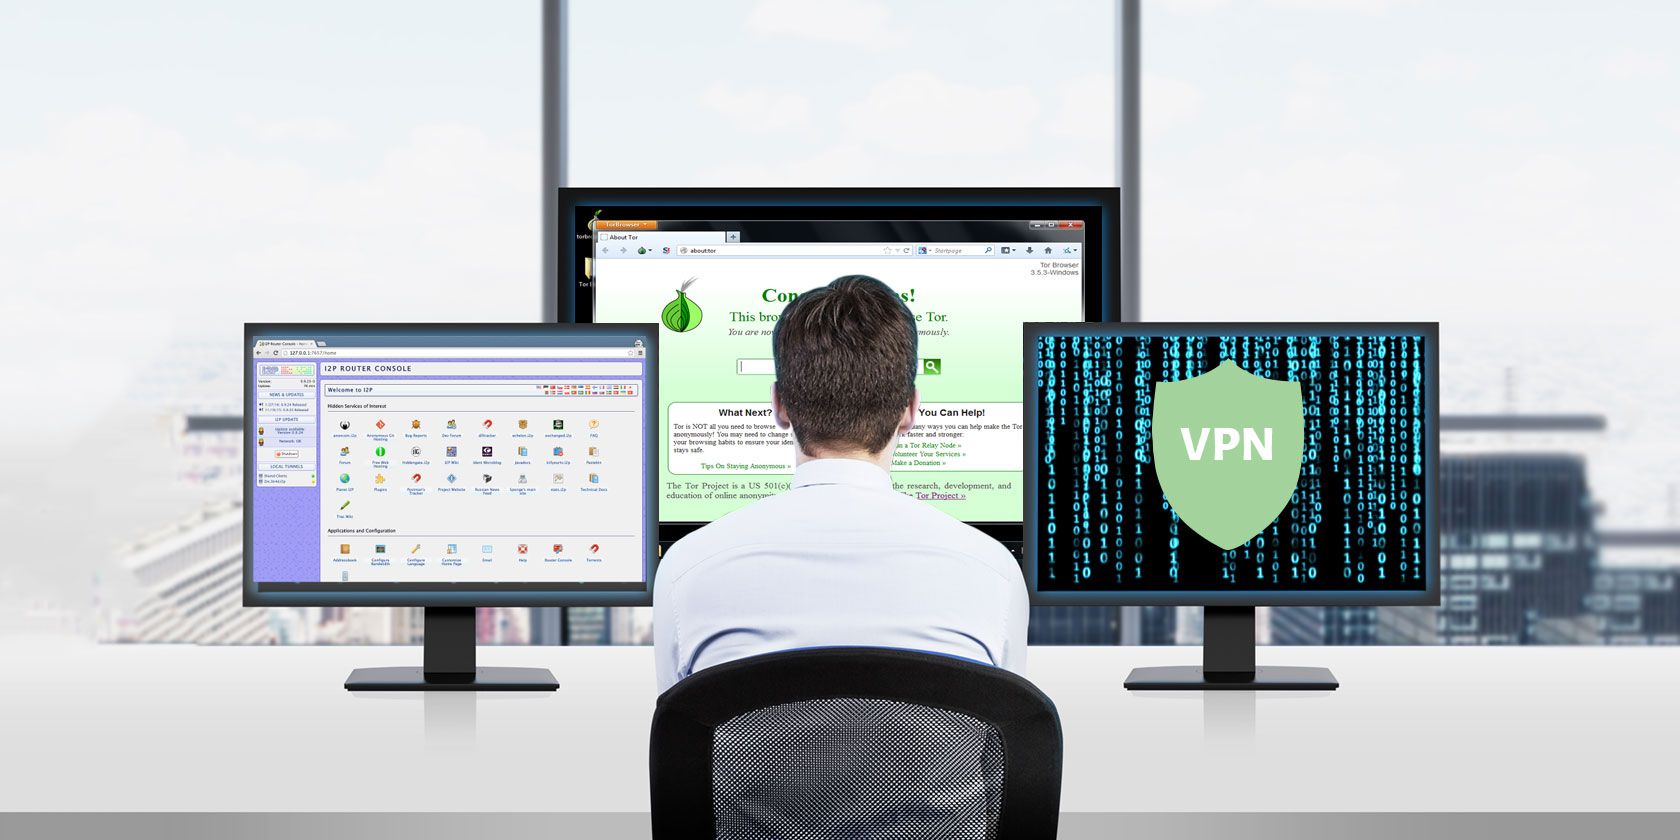 I2P vs. Tor vs. VPN: Which Is More Secure?